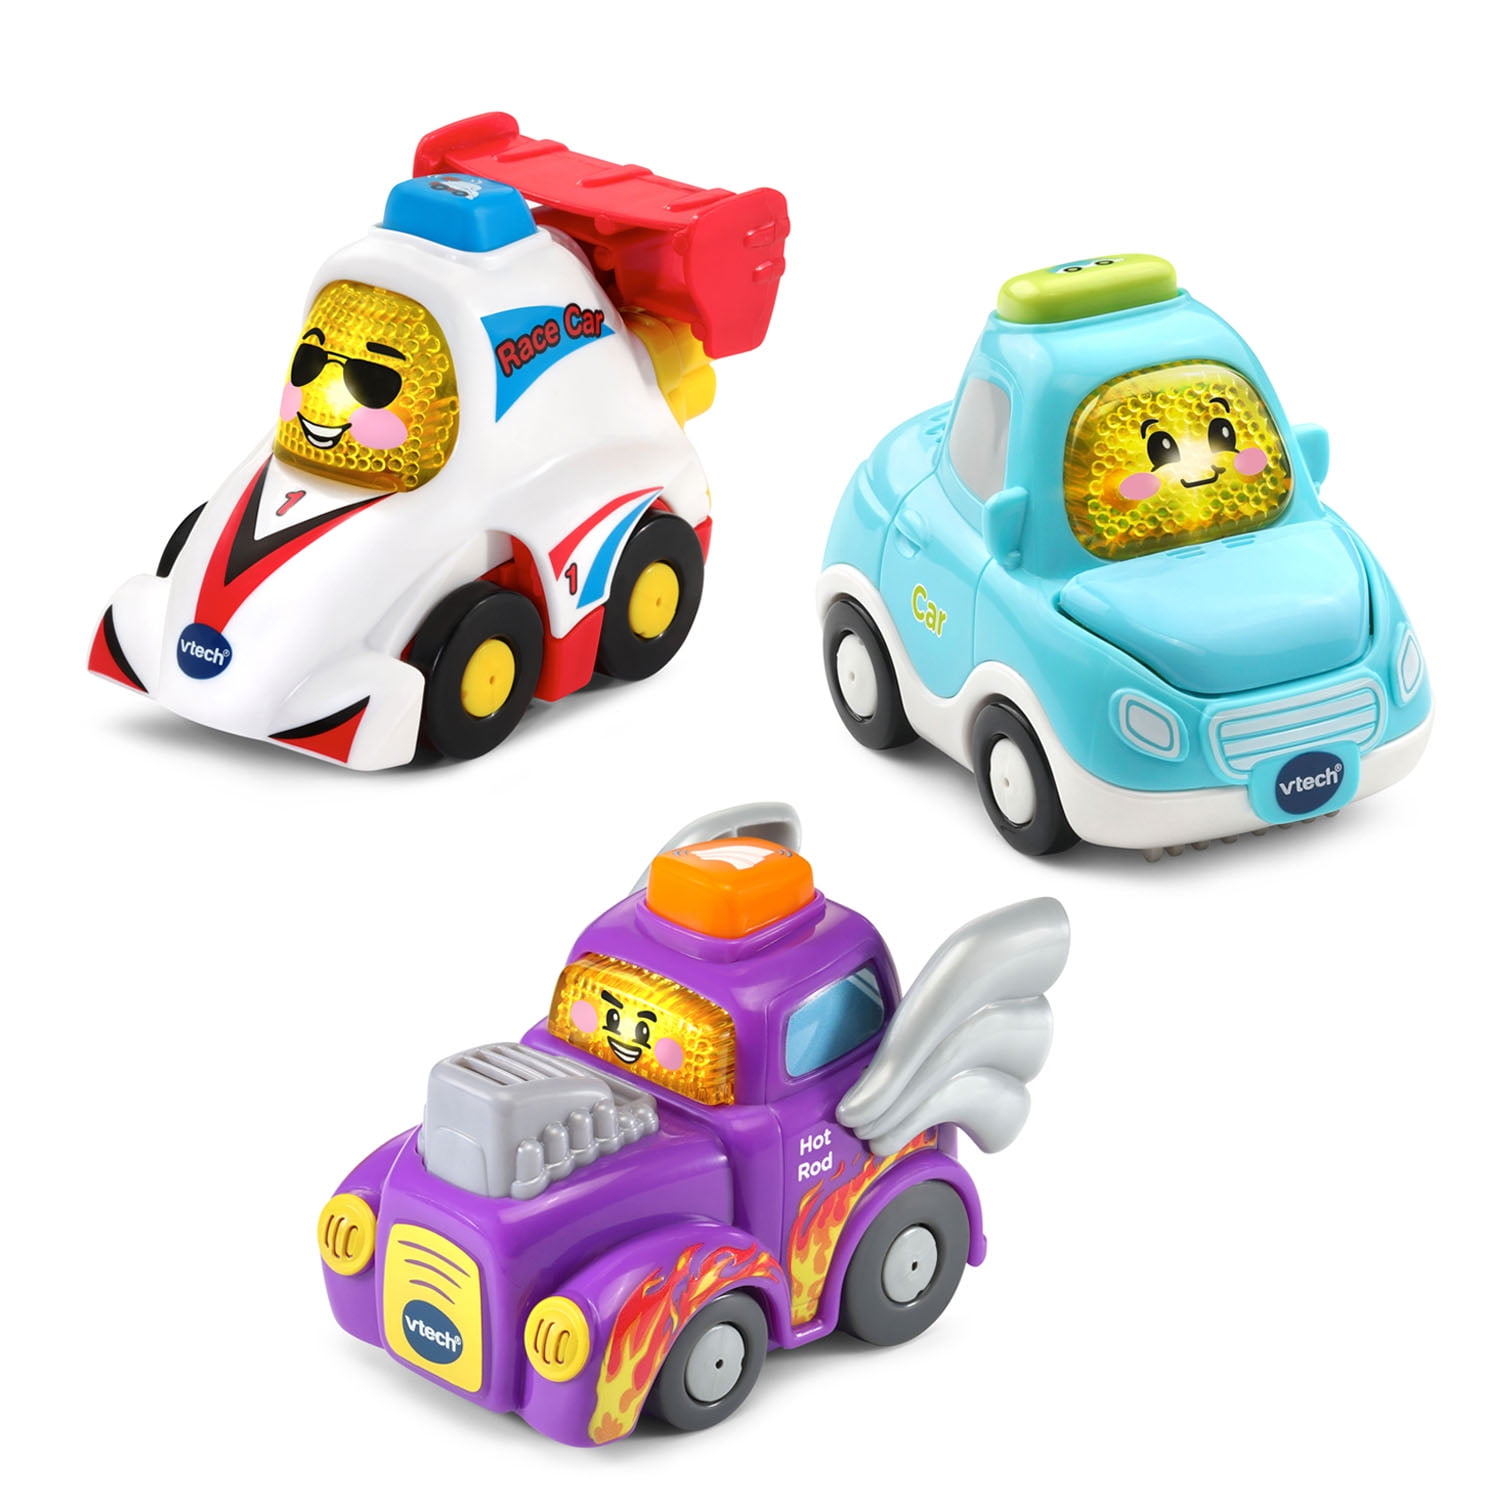 Details about   Go Go Cory Carson & Chrissy Netflix Cars Interactive Vehicles Vtech Music Lights 